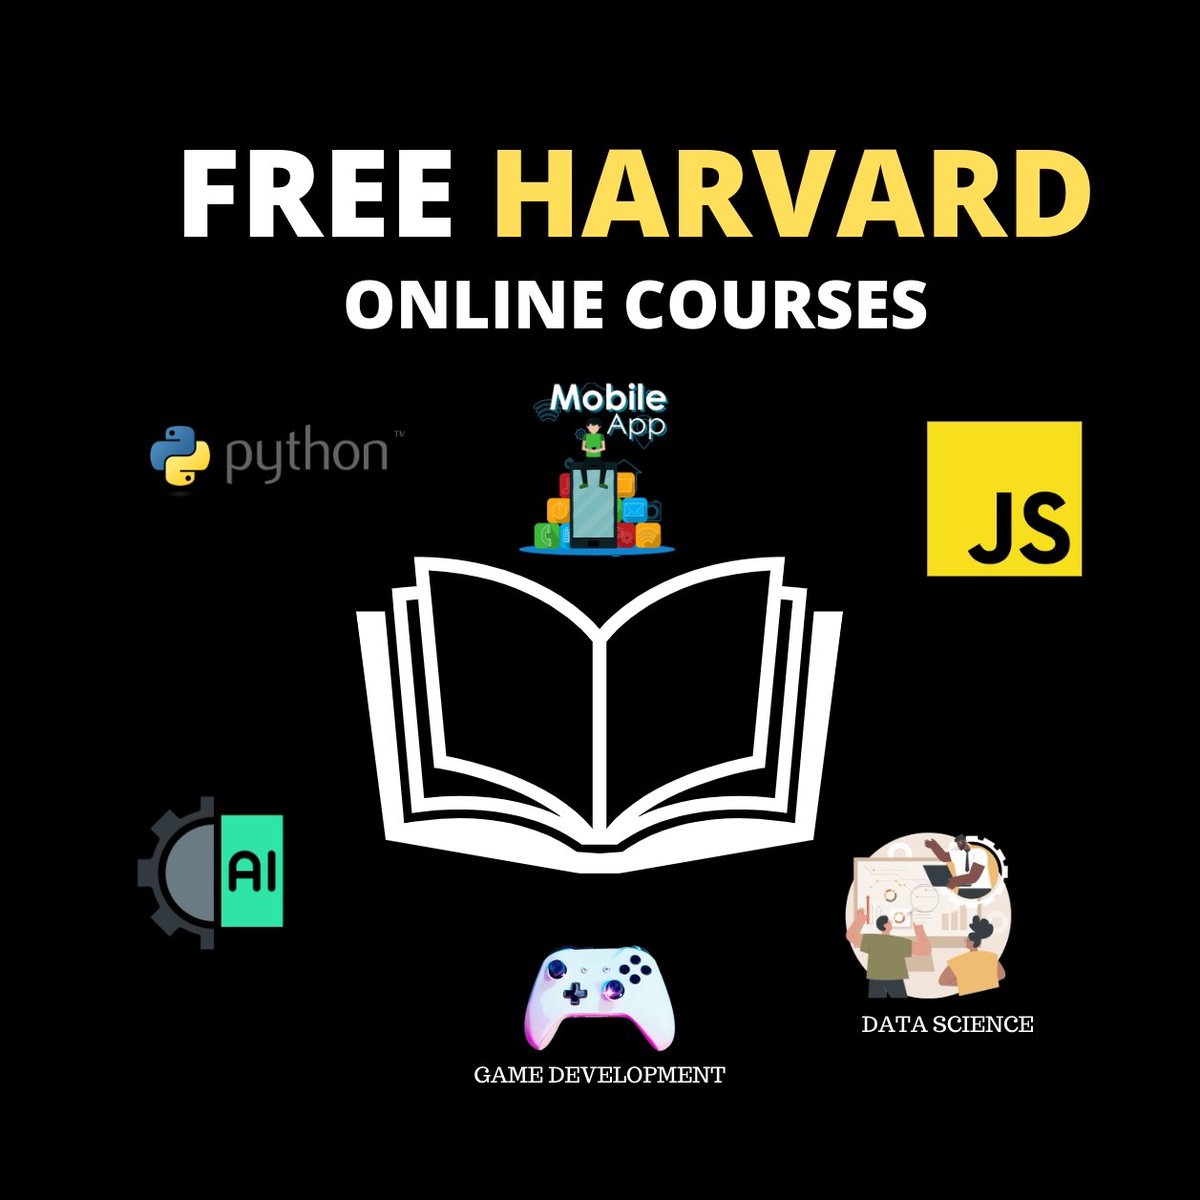 10 FREE Harvard Online courses 🚀

Check it now 👇